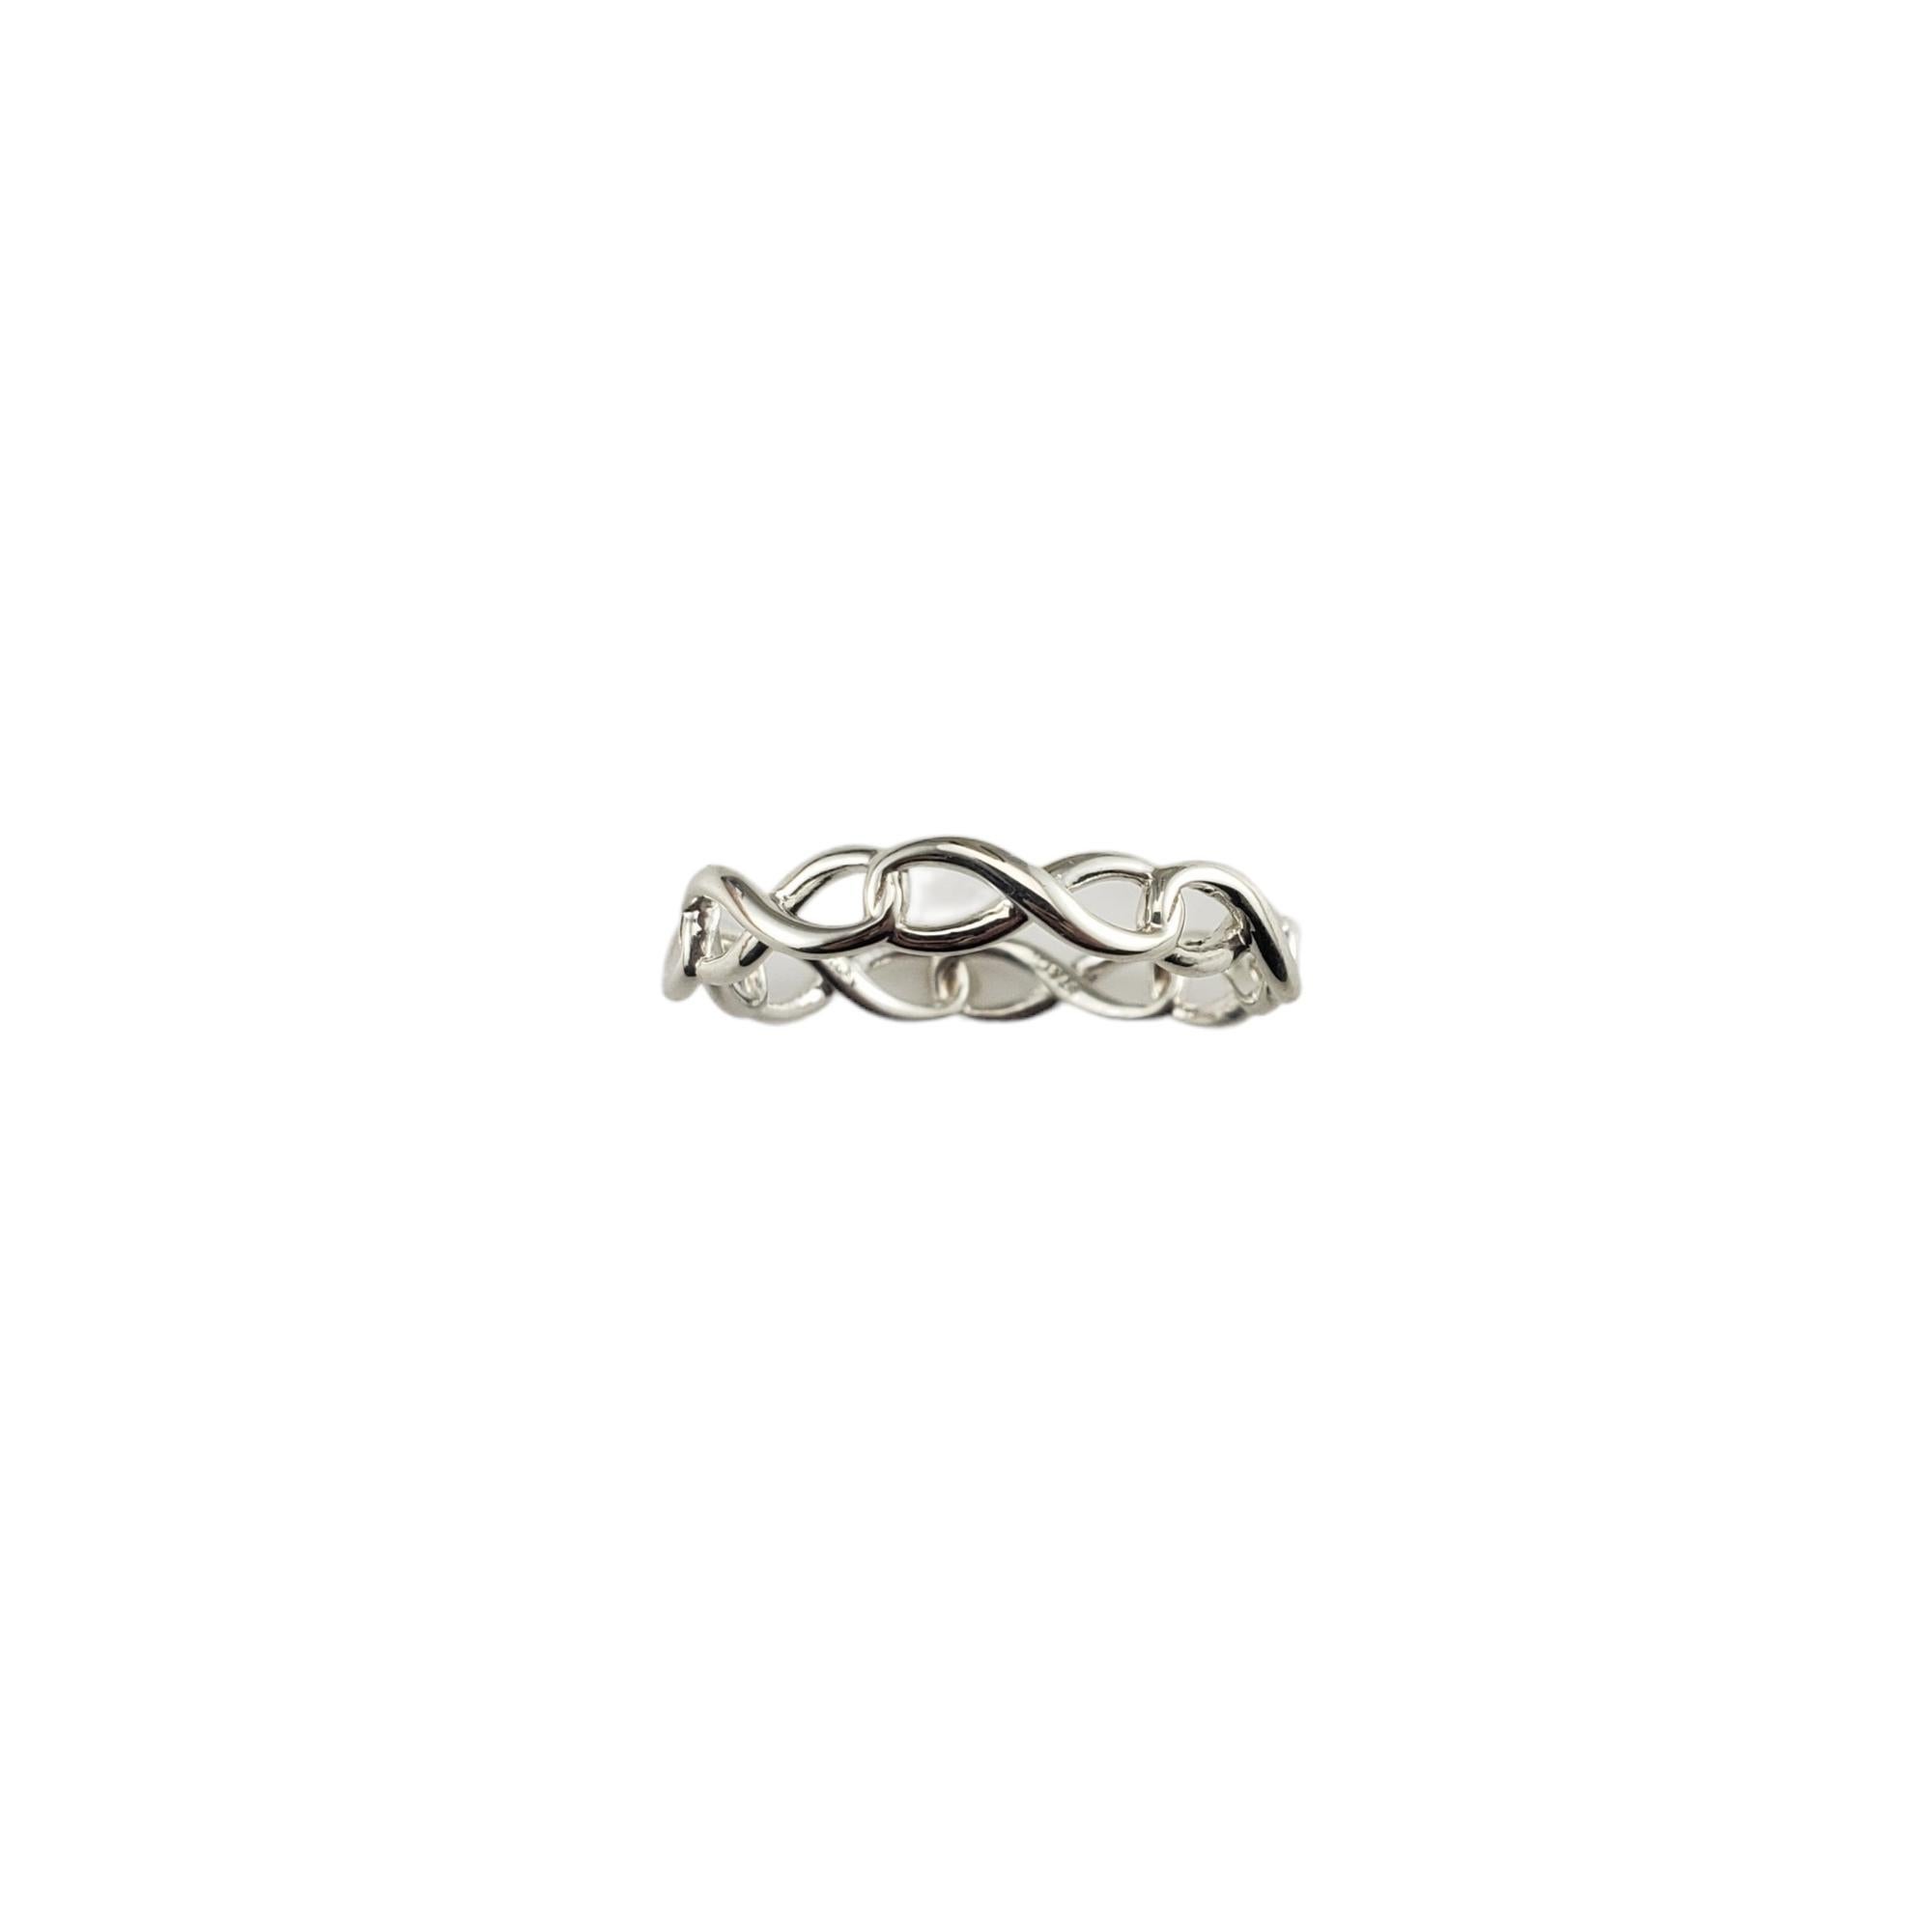 Vintage Tiffany & Co. Sterling Silver Infinity Band Ring Size 8-8.25--

This elegant infinity band by Tiffany & Co. is crafted in beautifully detailed sterling silver.  Width: 4 mm.

Ring size: 8-8.25

Hallmark:  T&CO.  925

Weight: 1.6 gr./ 1.0